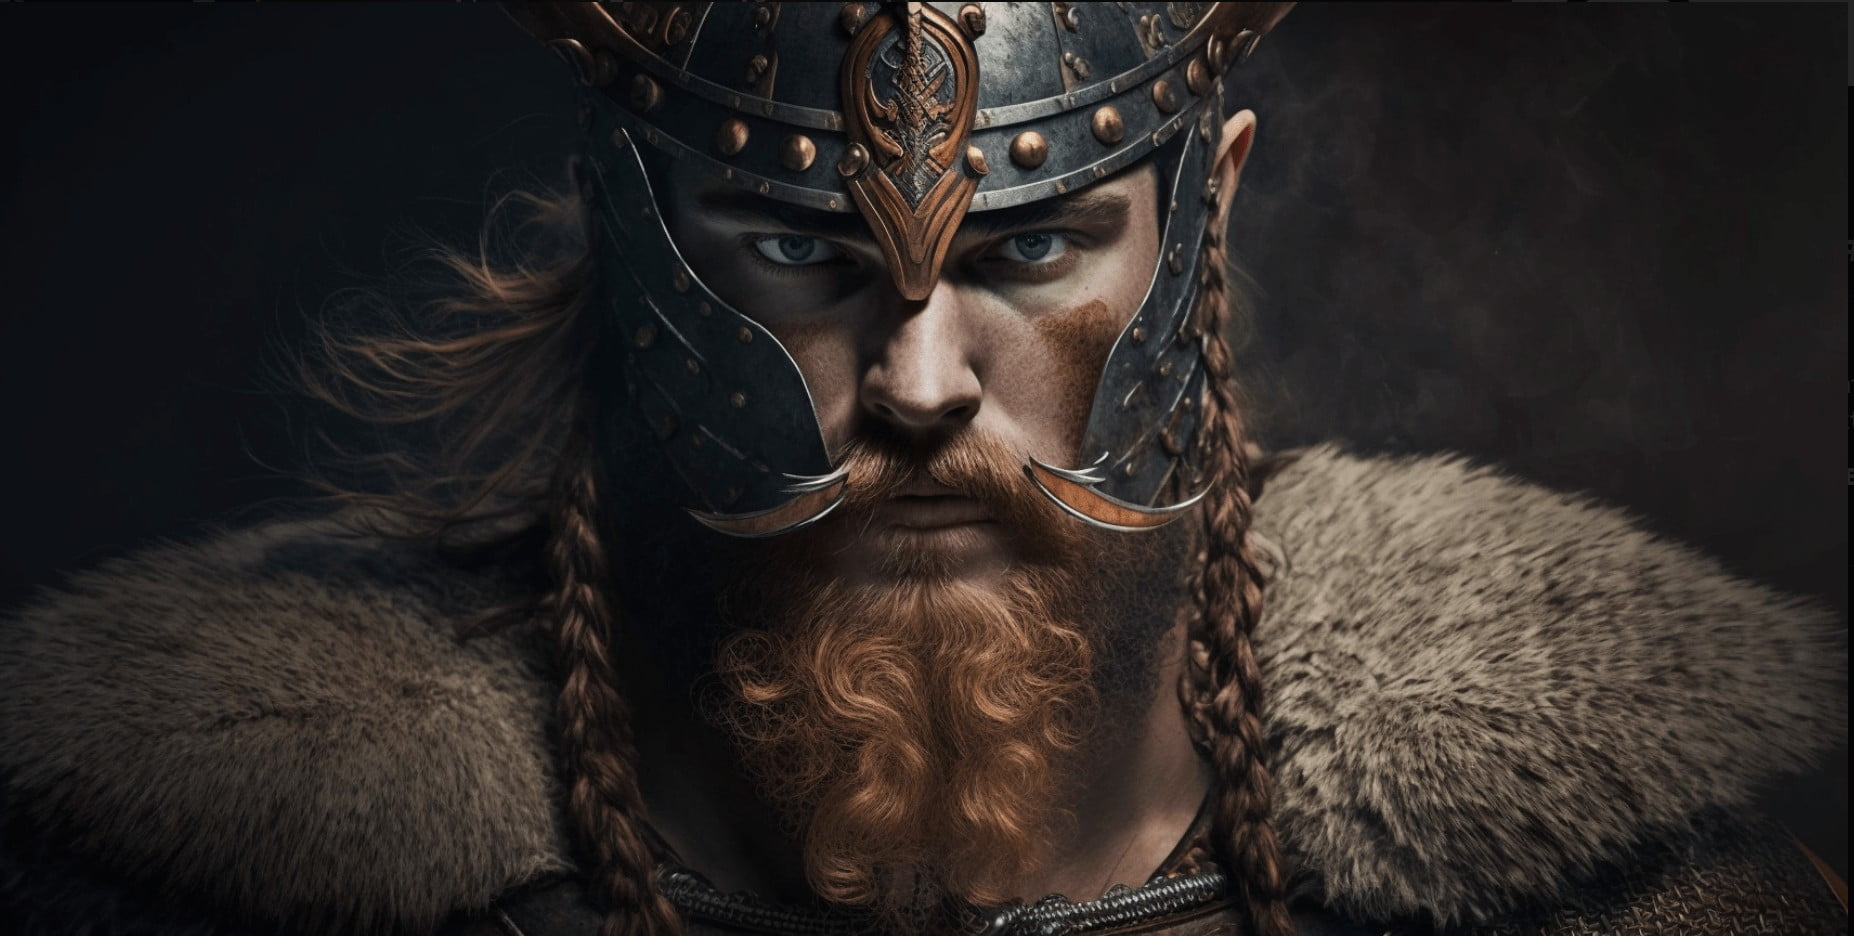 Viking Leather Armor - The History, Styles, and Appeal